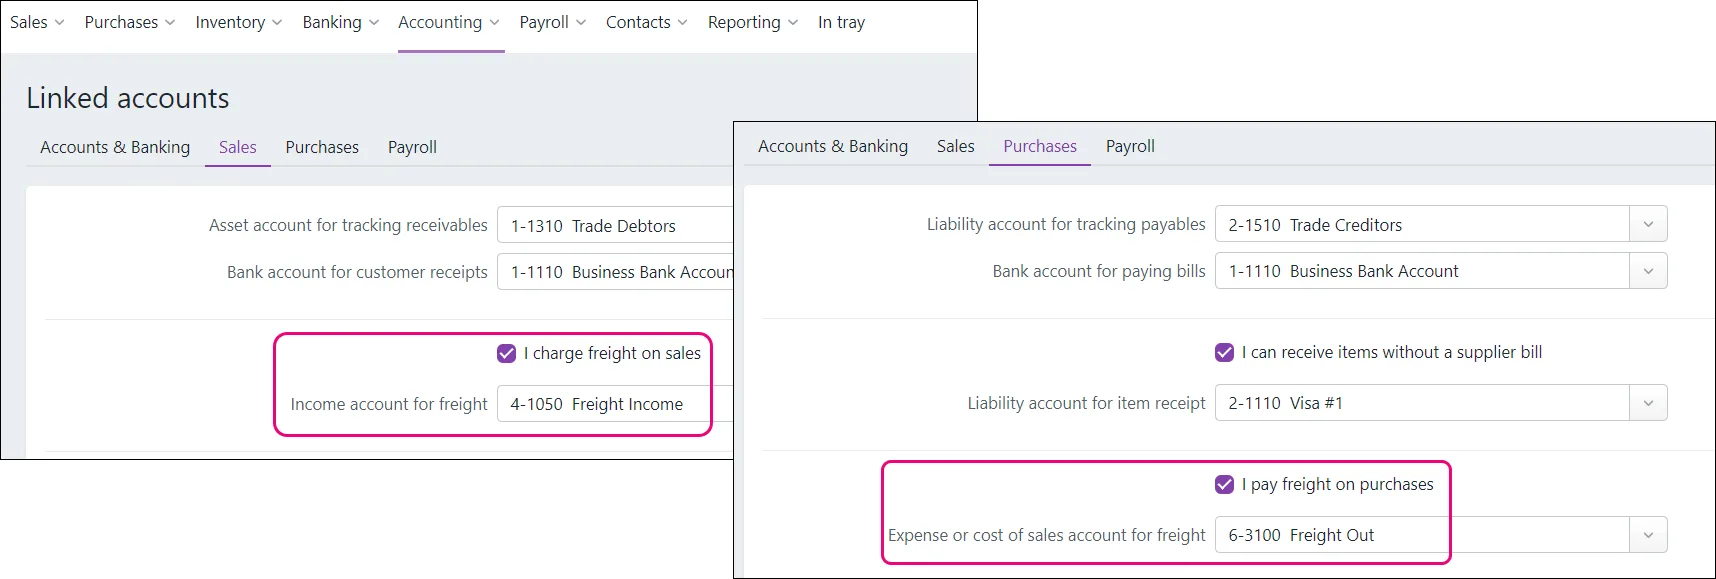 Choosing freight linked accounts